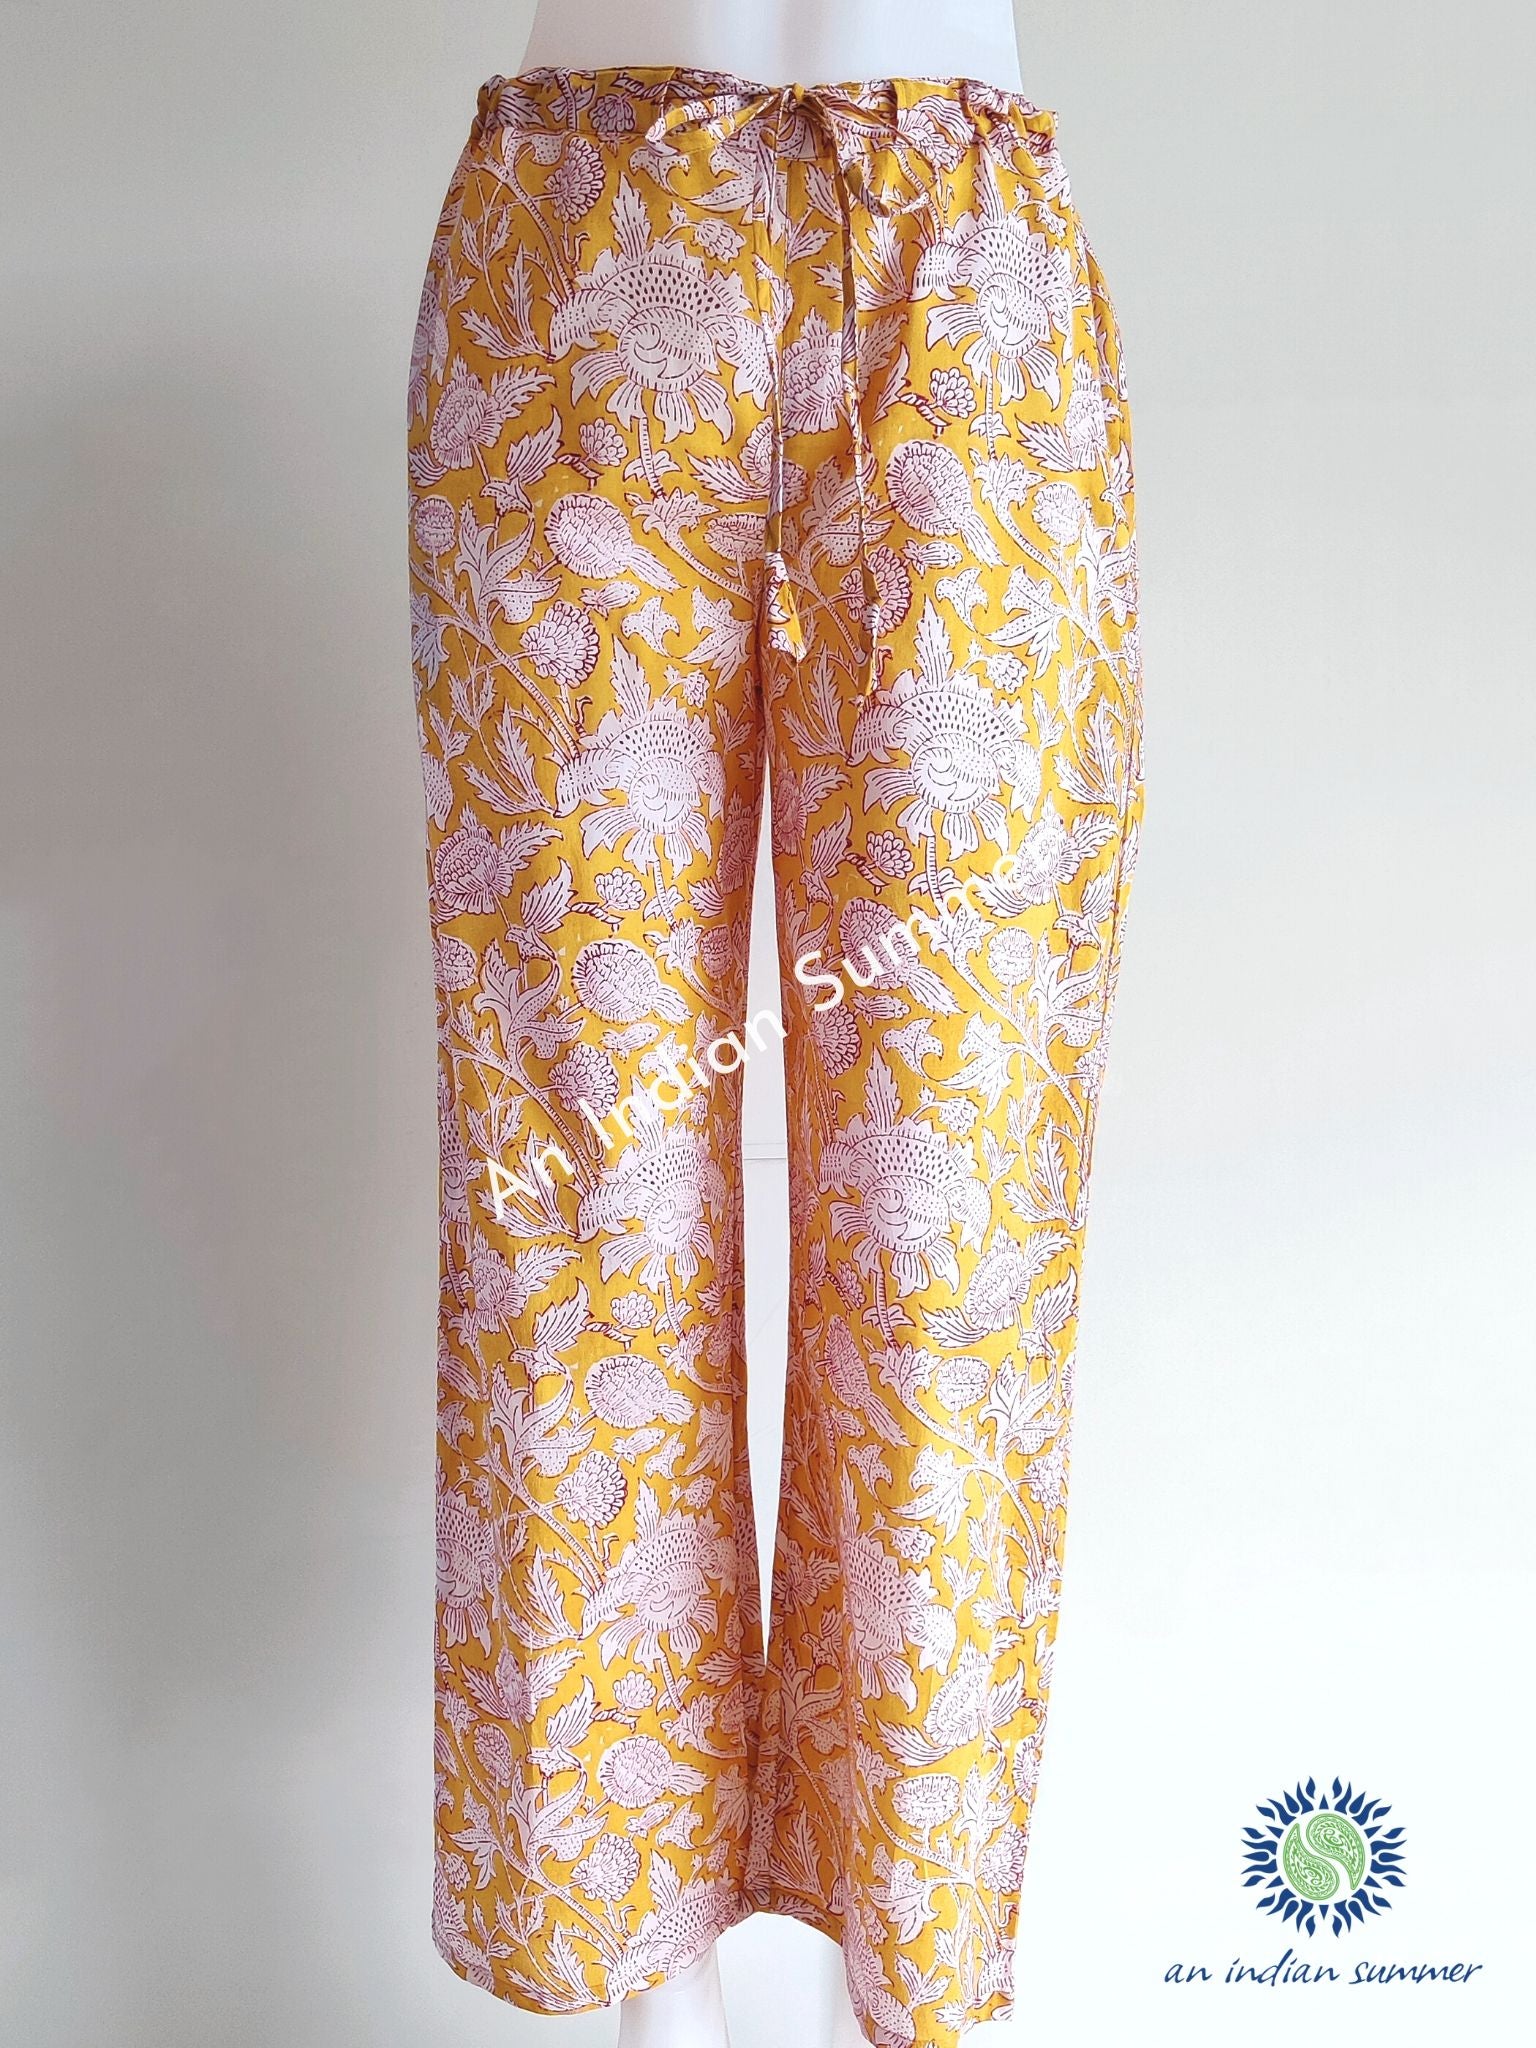 Cotton Trousers | Thistle | Amber | Botanical Block Print | Hand Block Printed | Cotton Voile | An Indian Summer | Seasonless Timeless Sustainable Ethical Authentic Artisan Conscious Clothing Lifestyle Brand